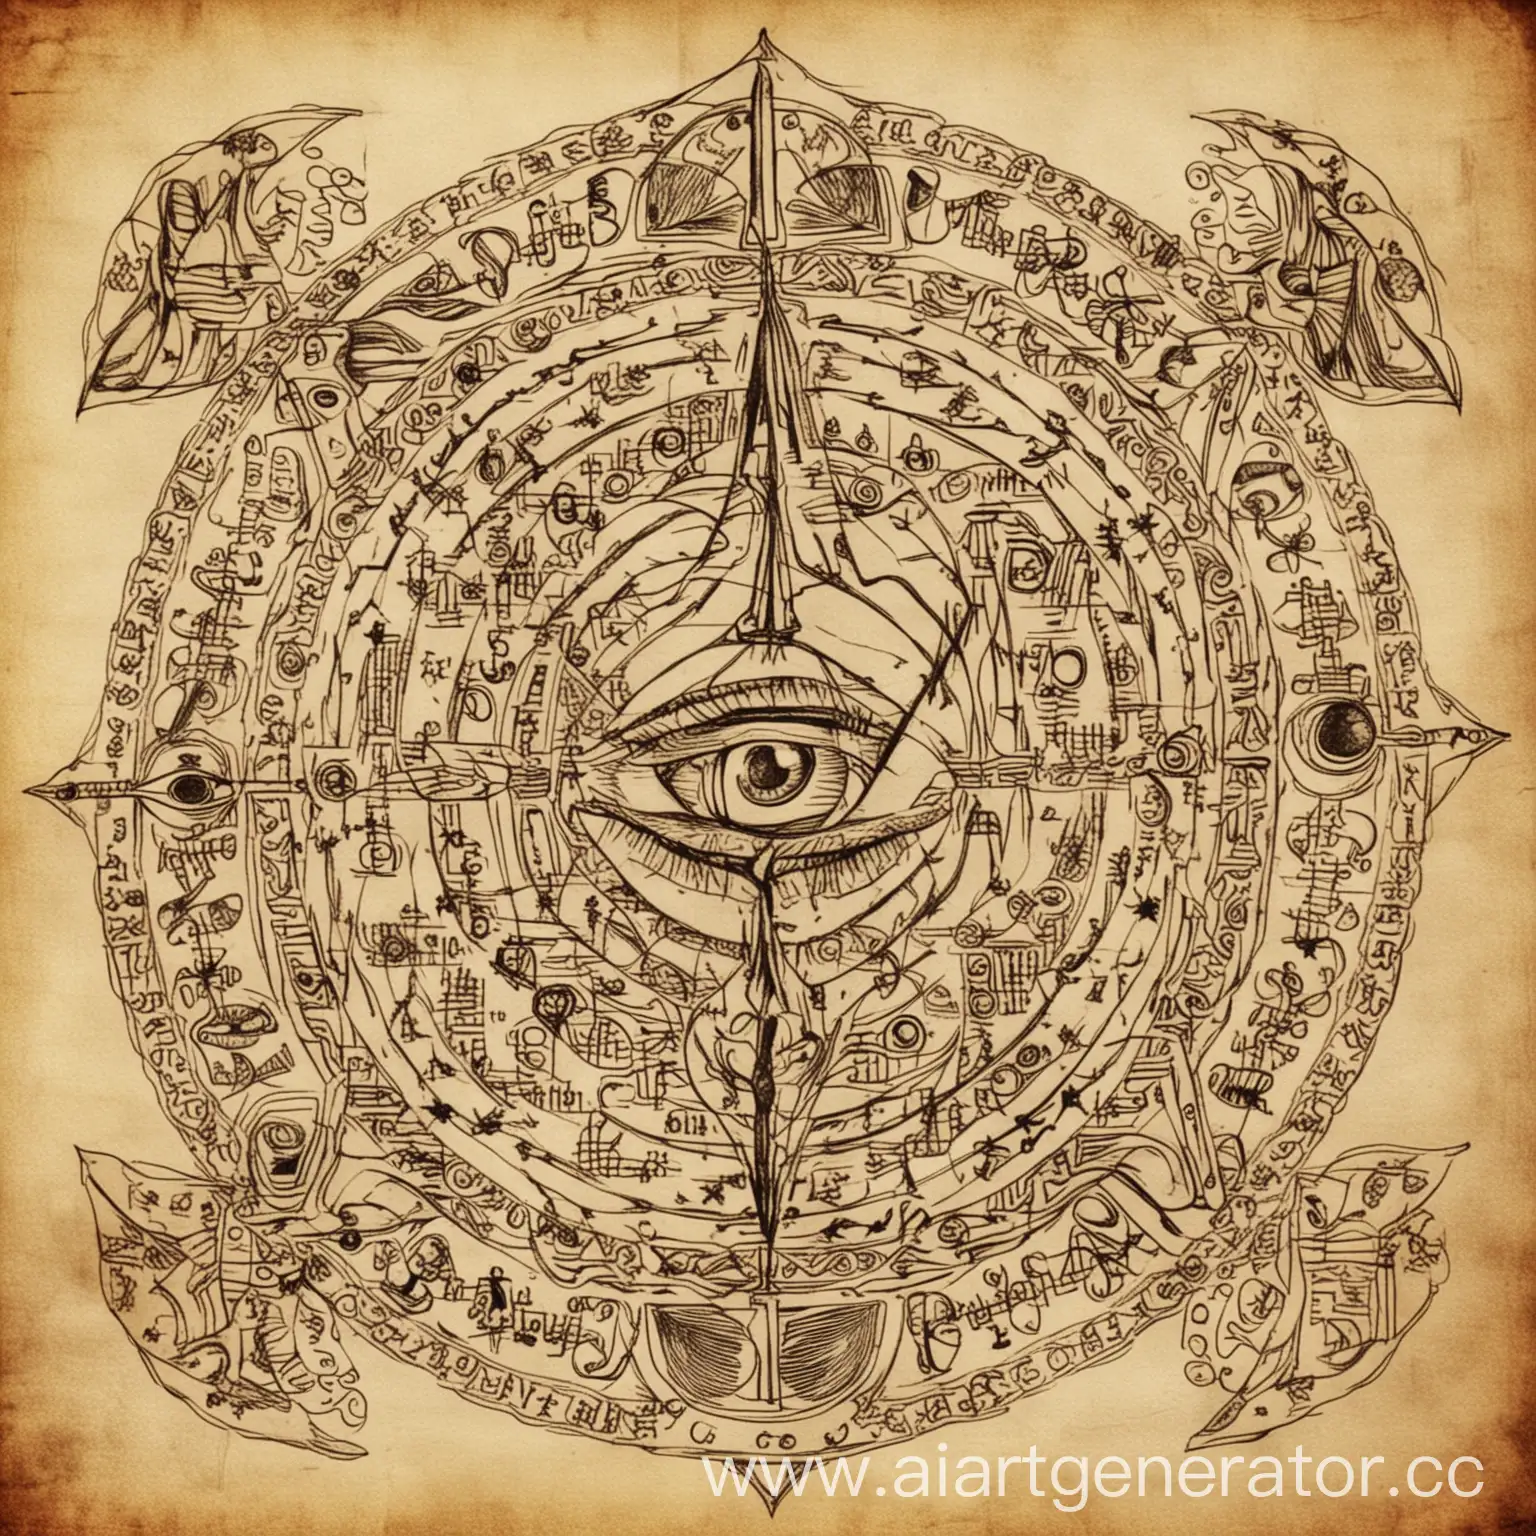 Mystical-Esoteric-Symbols-Unveiled-in-Cosmic-Symphony